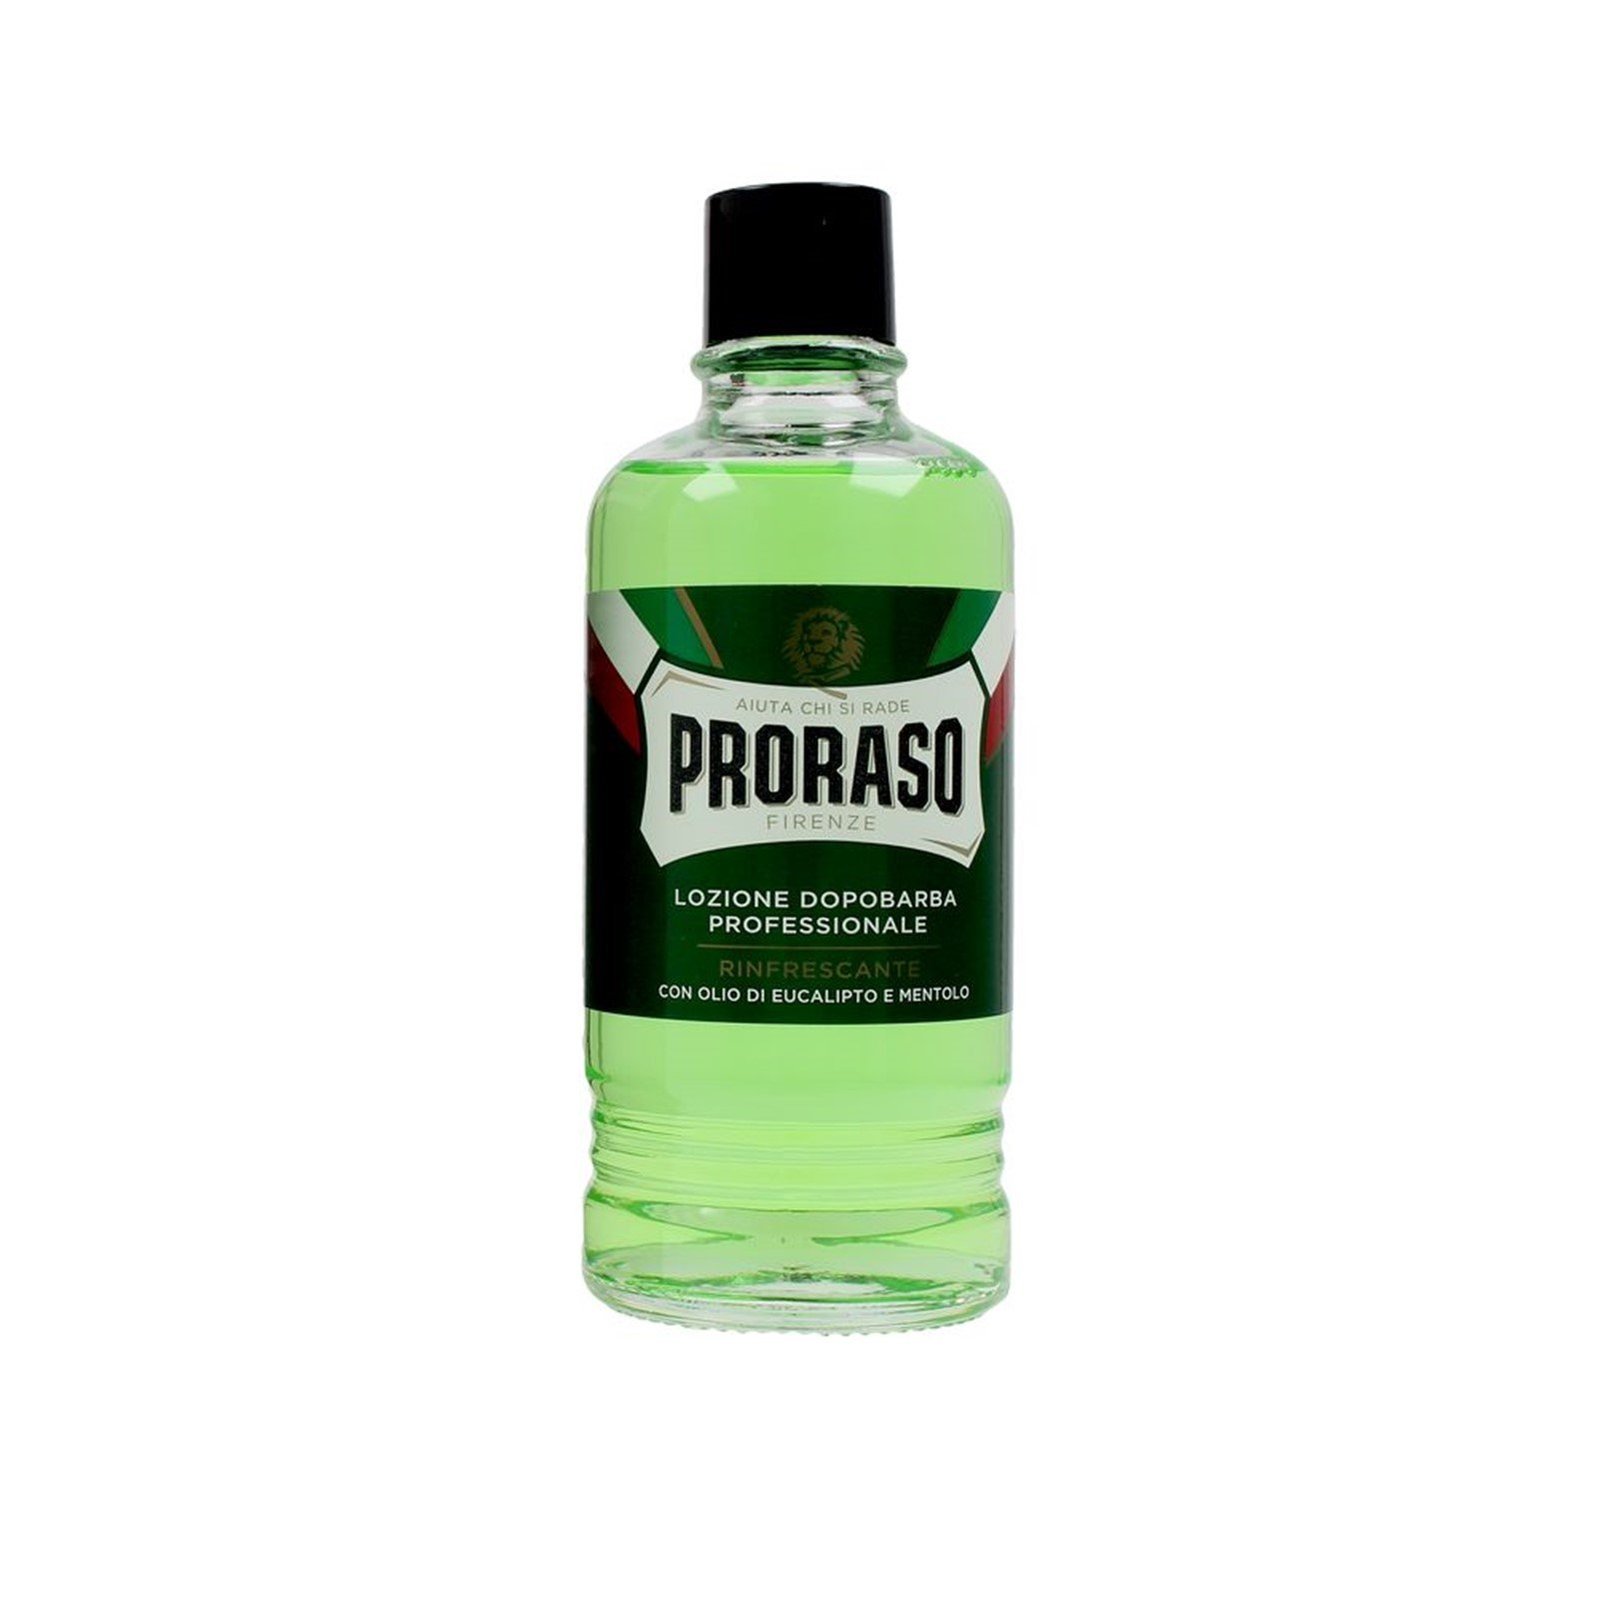 Proraso Professional After Shave Lotion Refreshing 400ml (13.5floz)